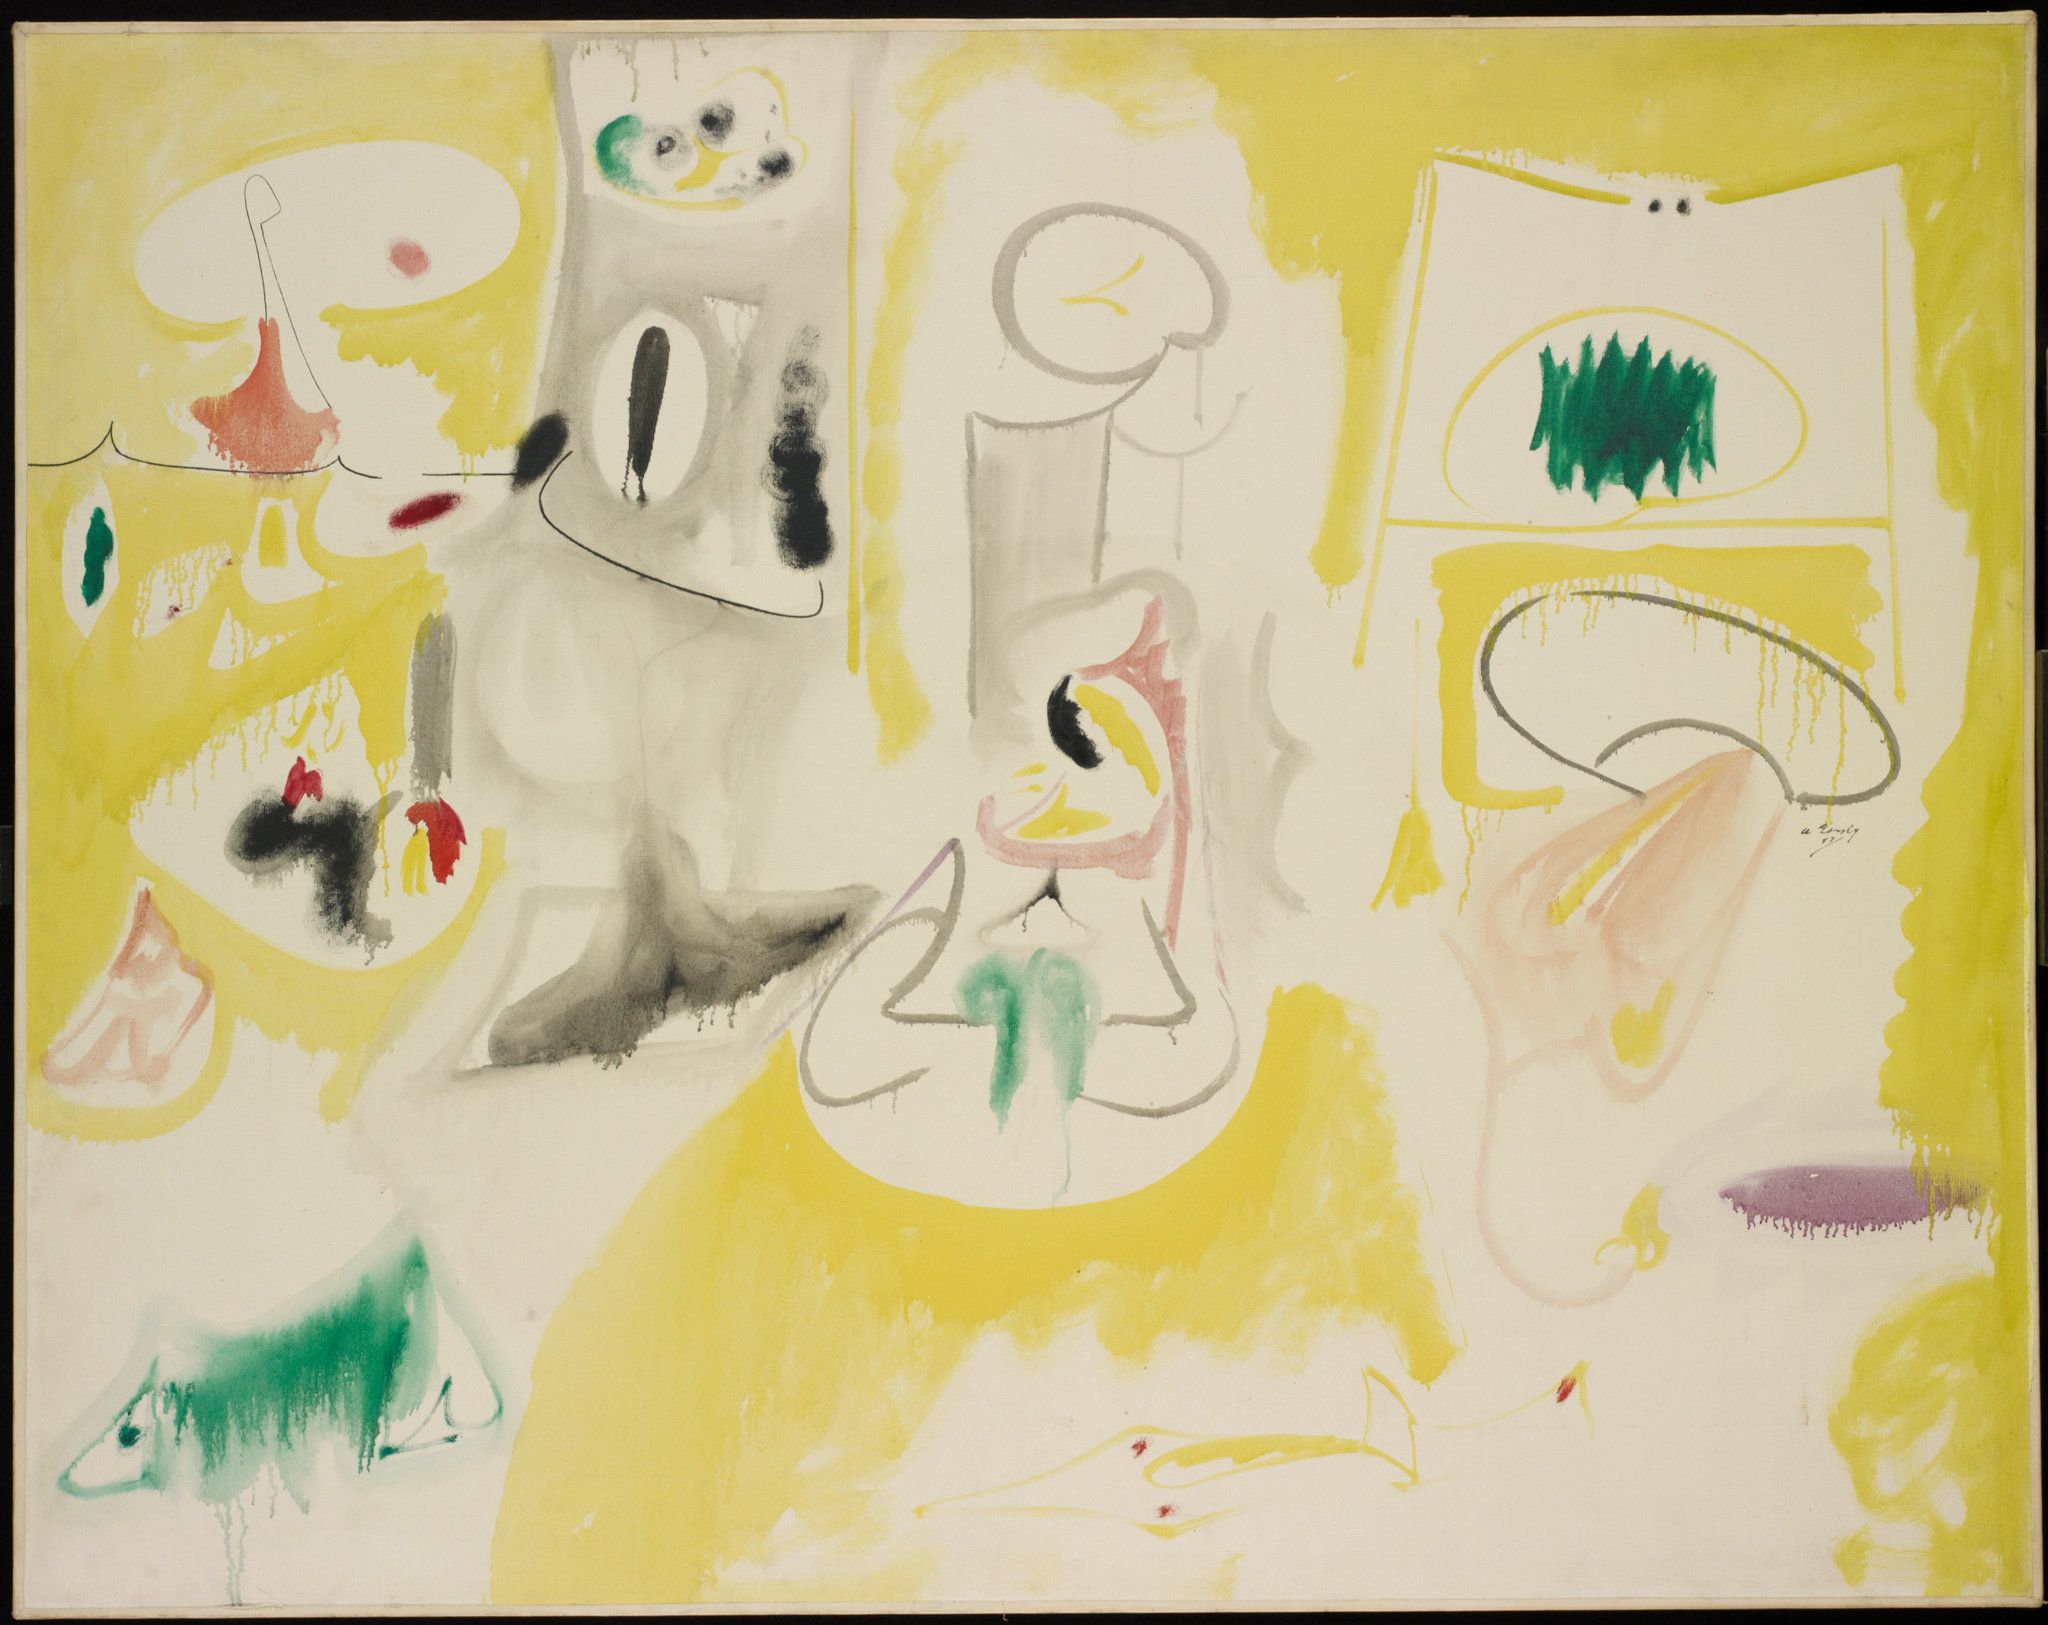 Arshile Gorky's Art of Bliss Remembered